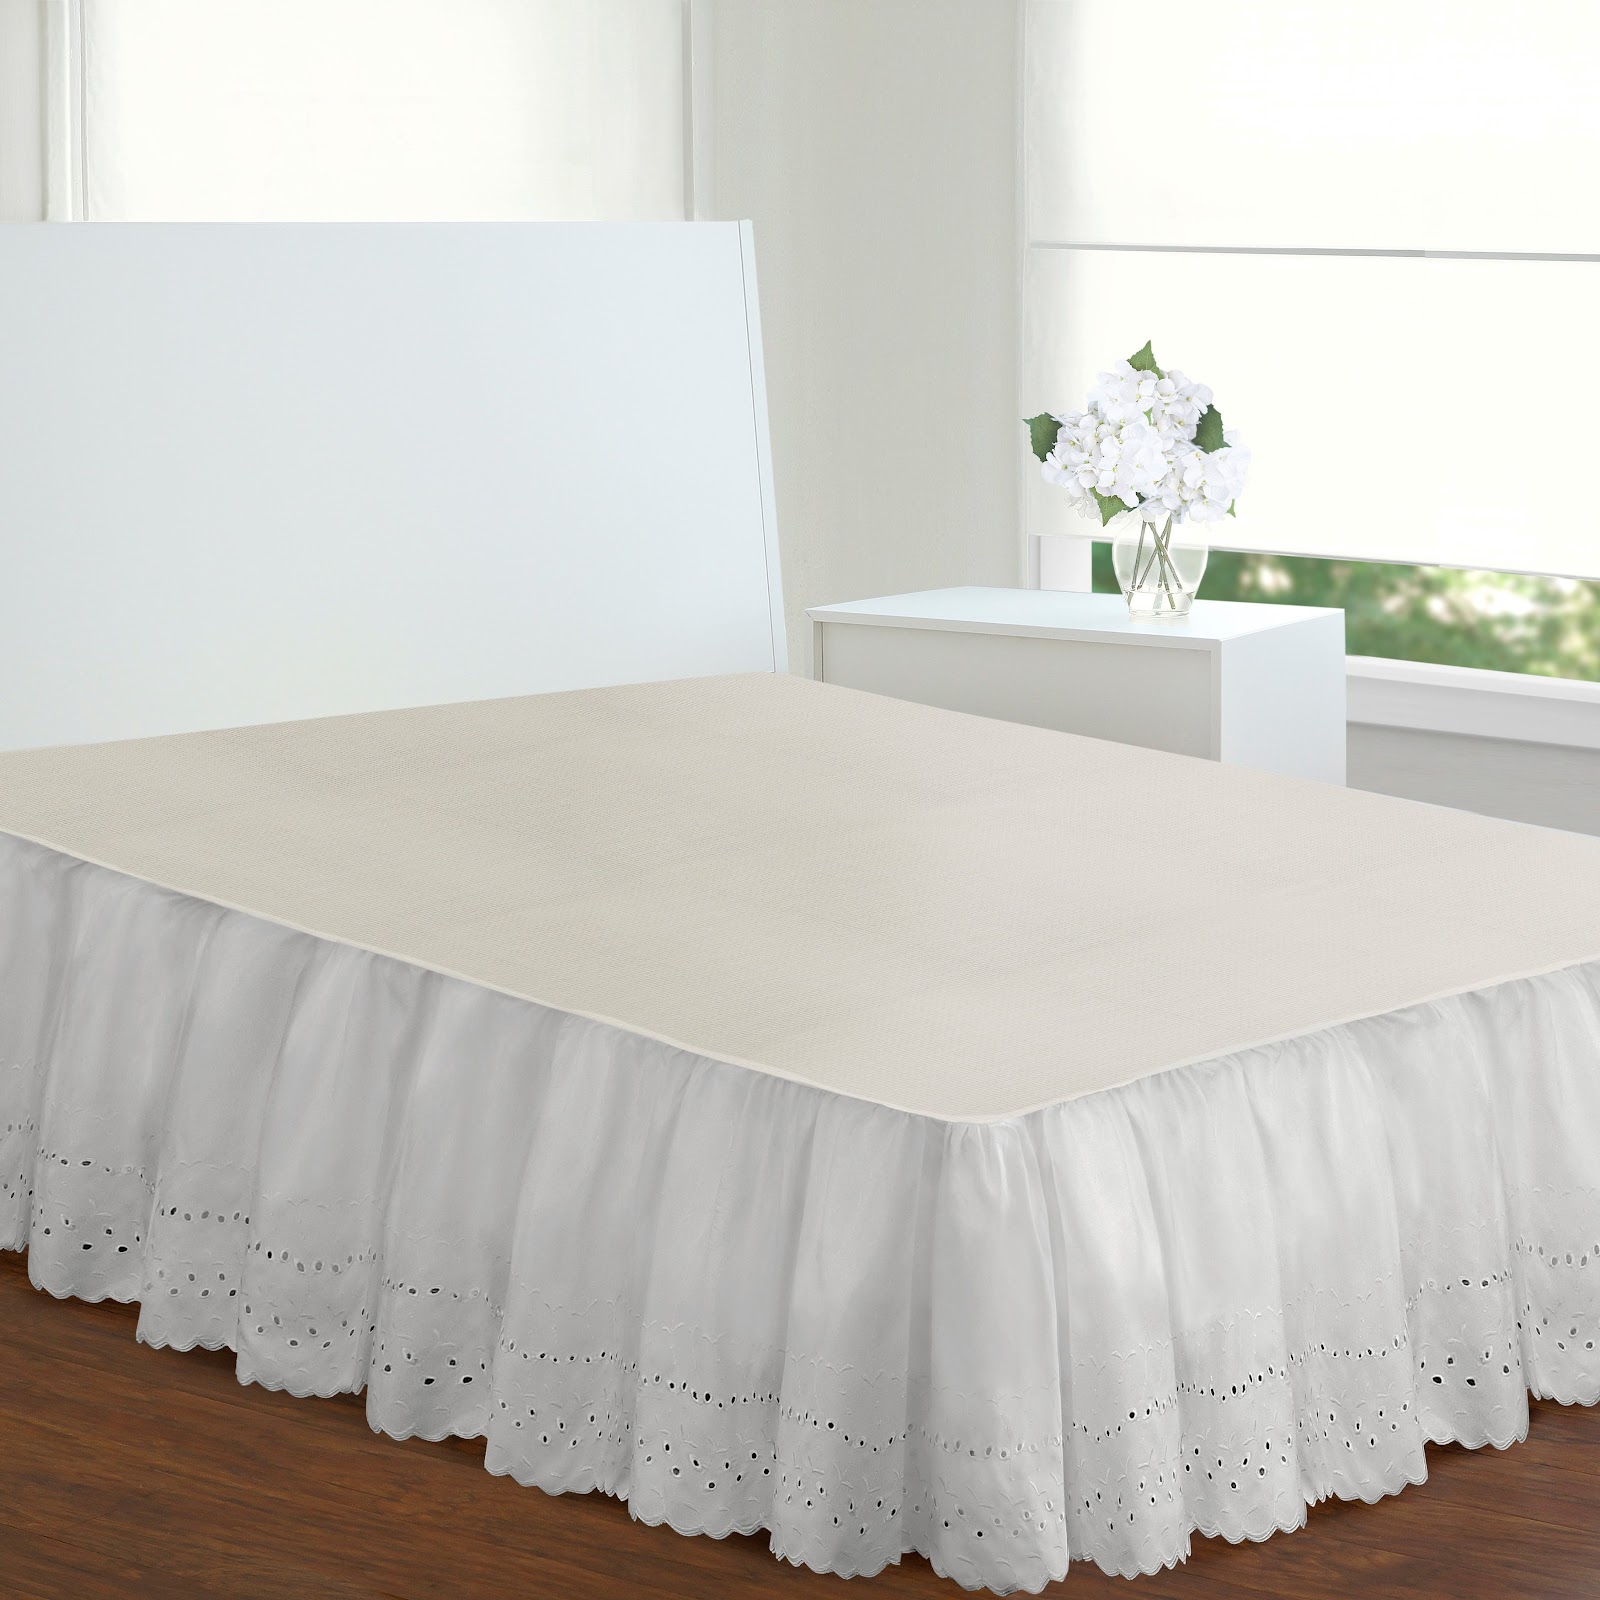 A bed skirt is used to hide the space under the bed and to prevent the accumulation of dust under a bed.